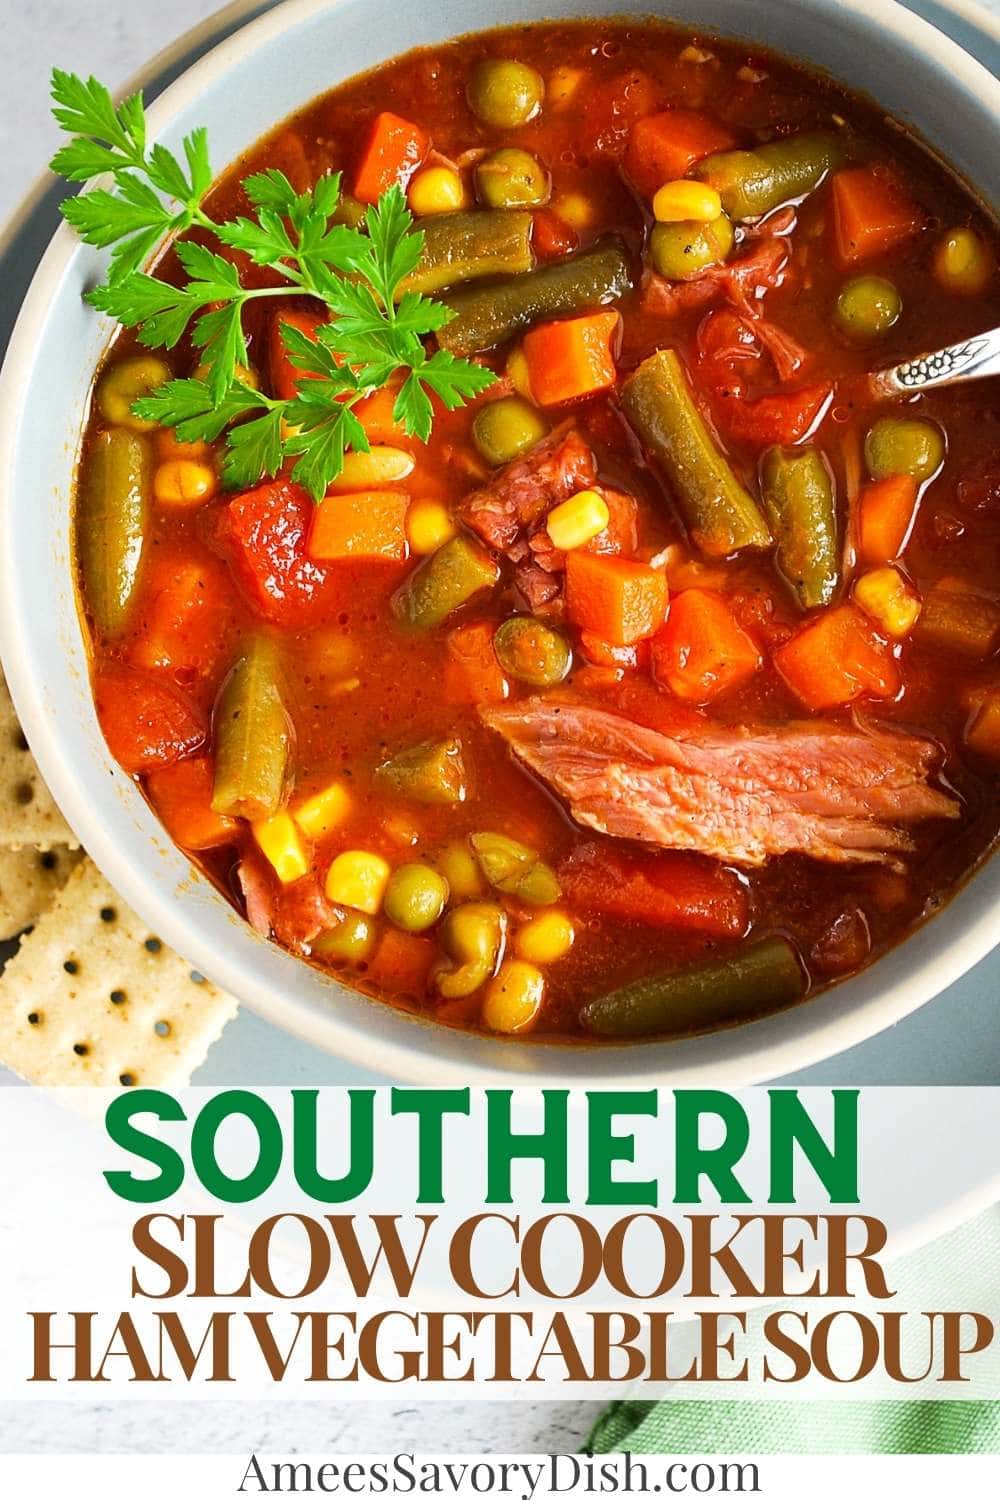 A healthier and easy recipe for homemade slow cooker southern ham vegetable soup made with leftover ham bone with meat and mixed frozen vegetables. via @Ameessavorydish